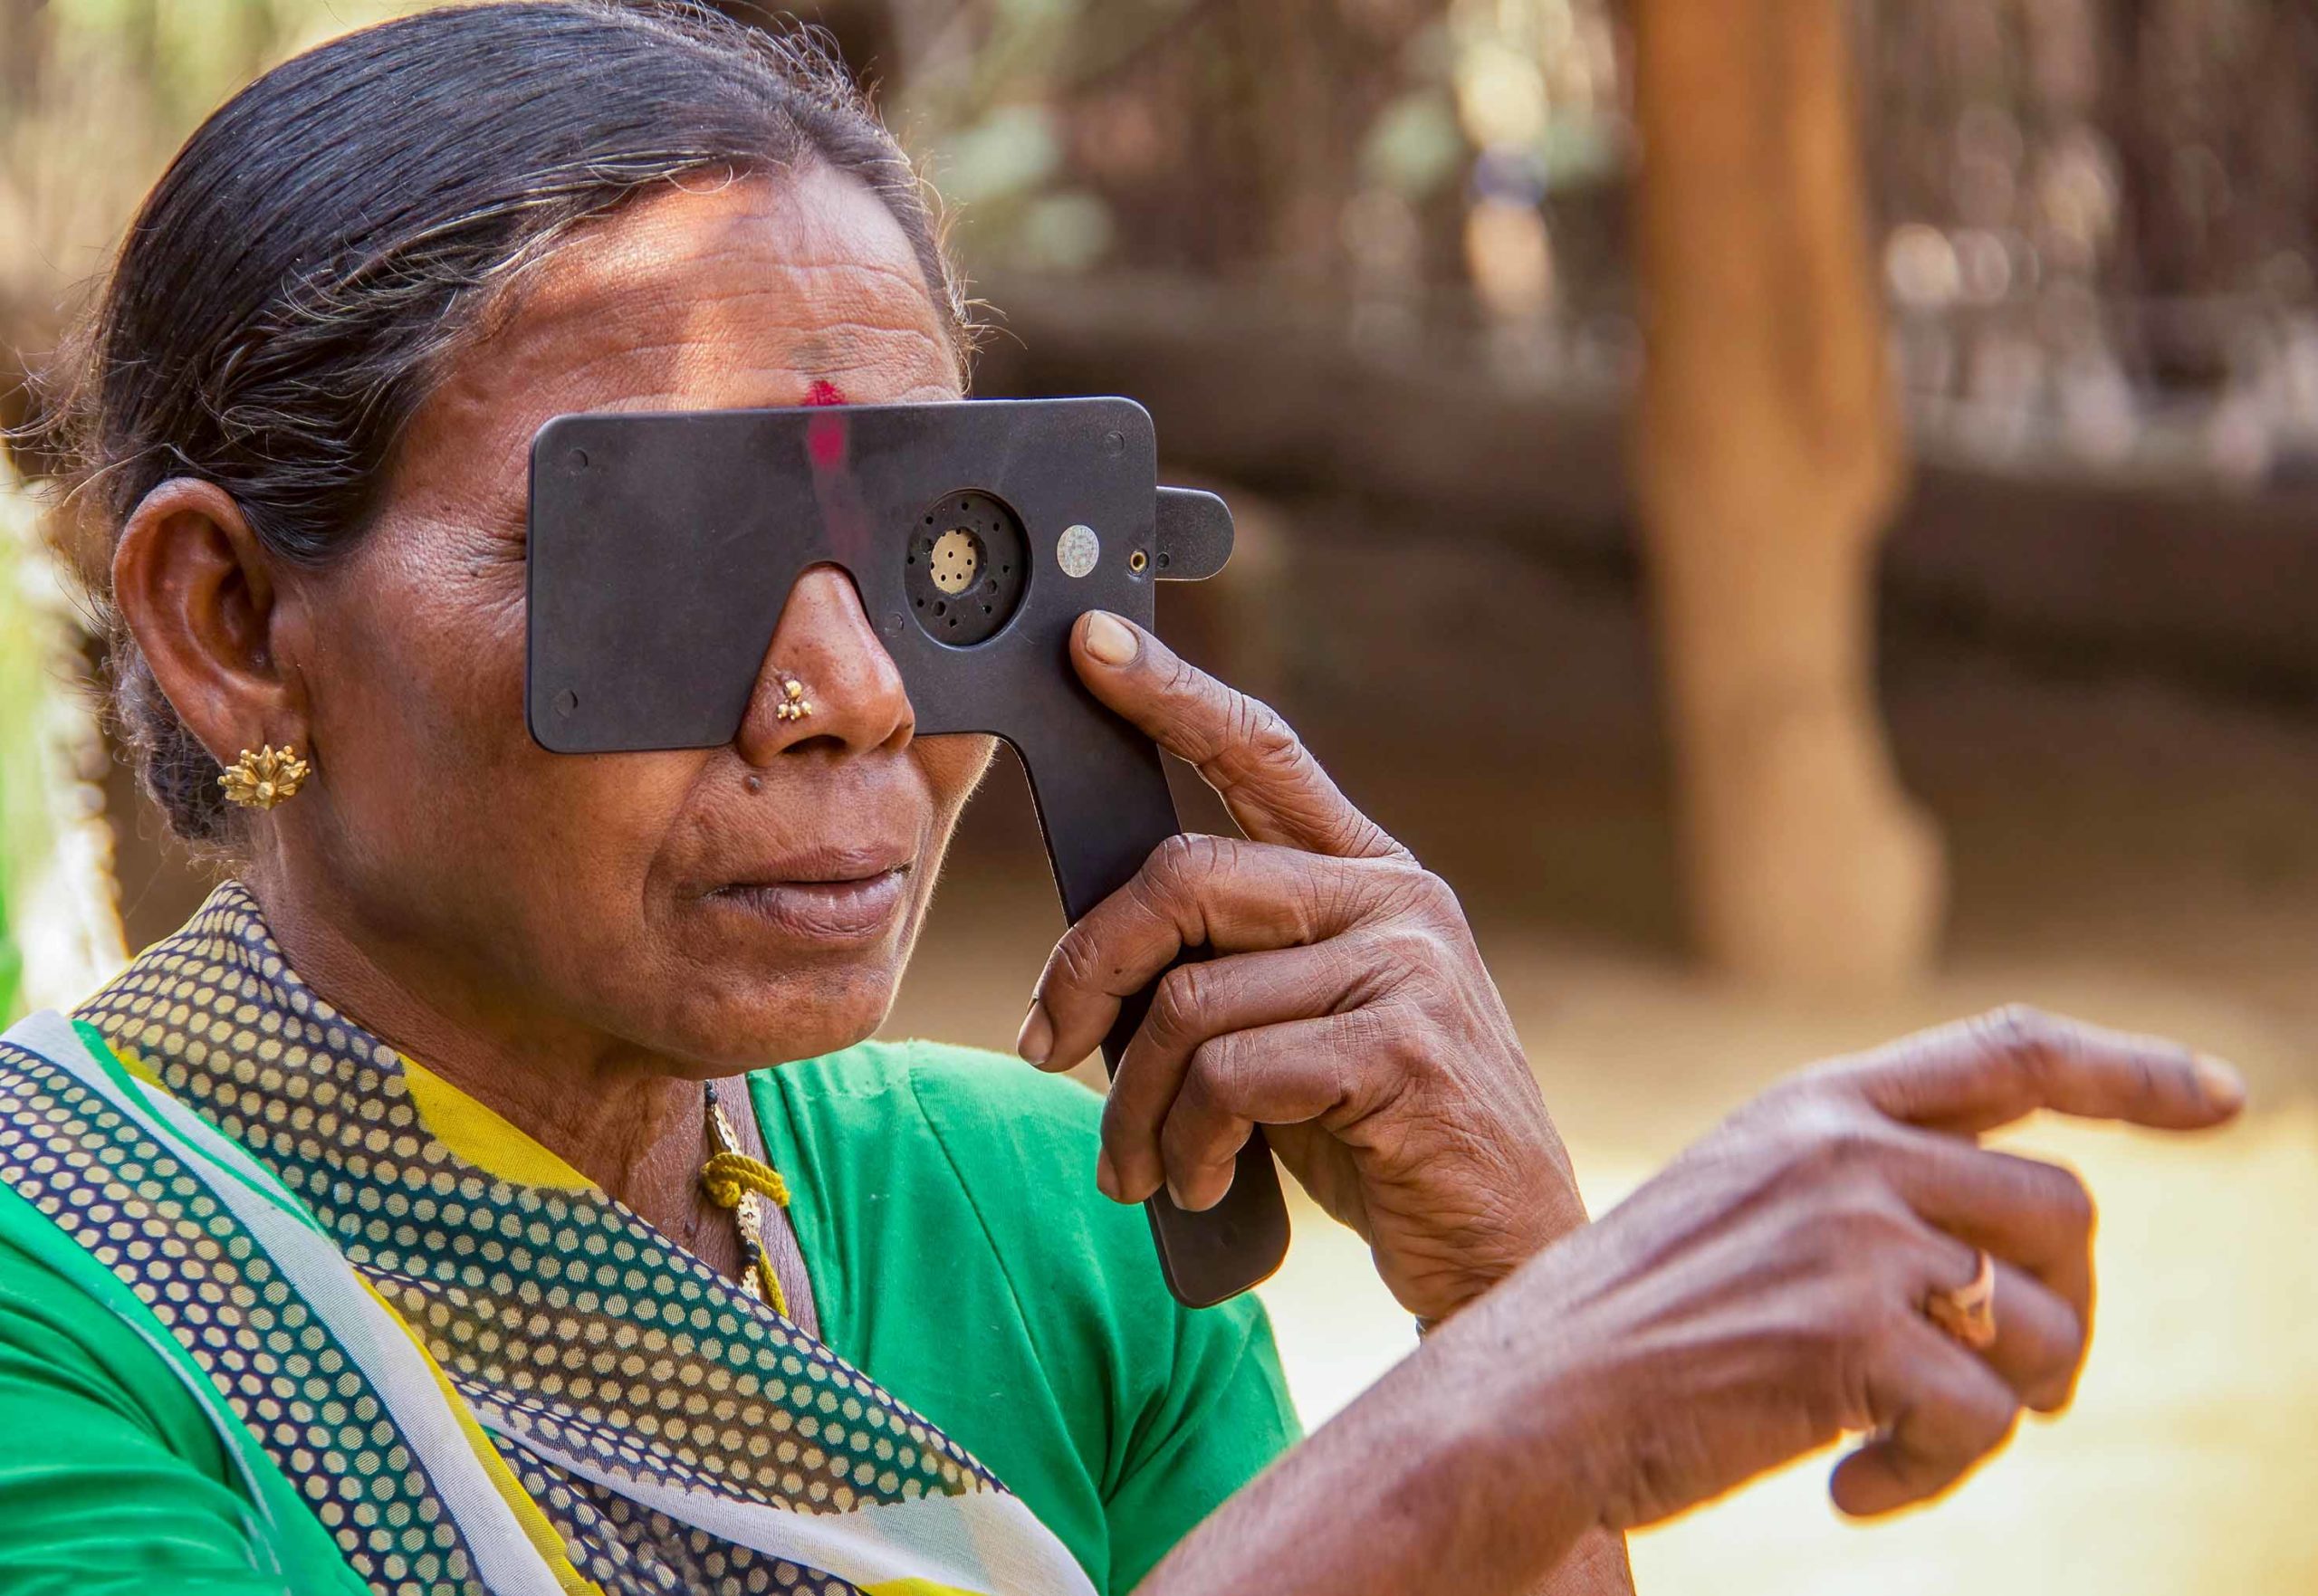 A patient responding to a vision chart, India. (Photo: Sri Marmamula CC BY-NC 4.0)